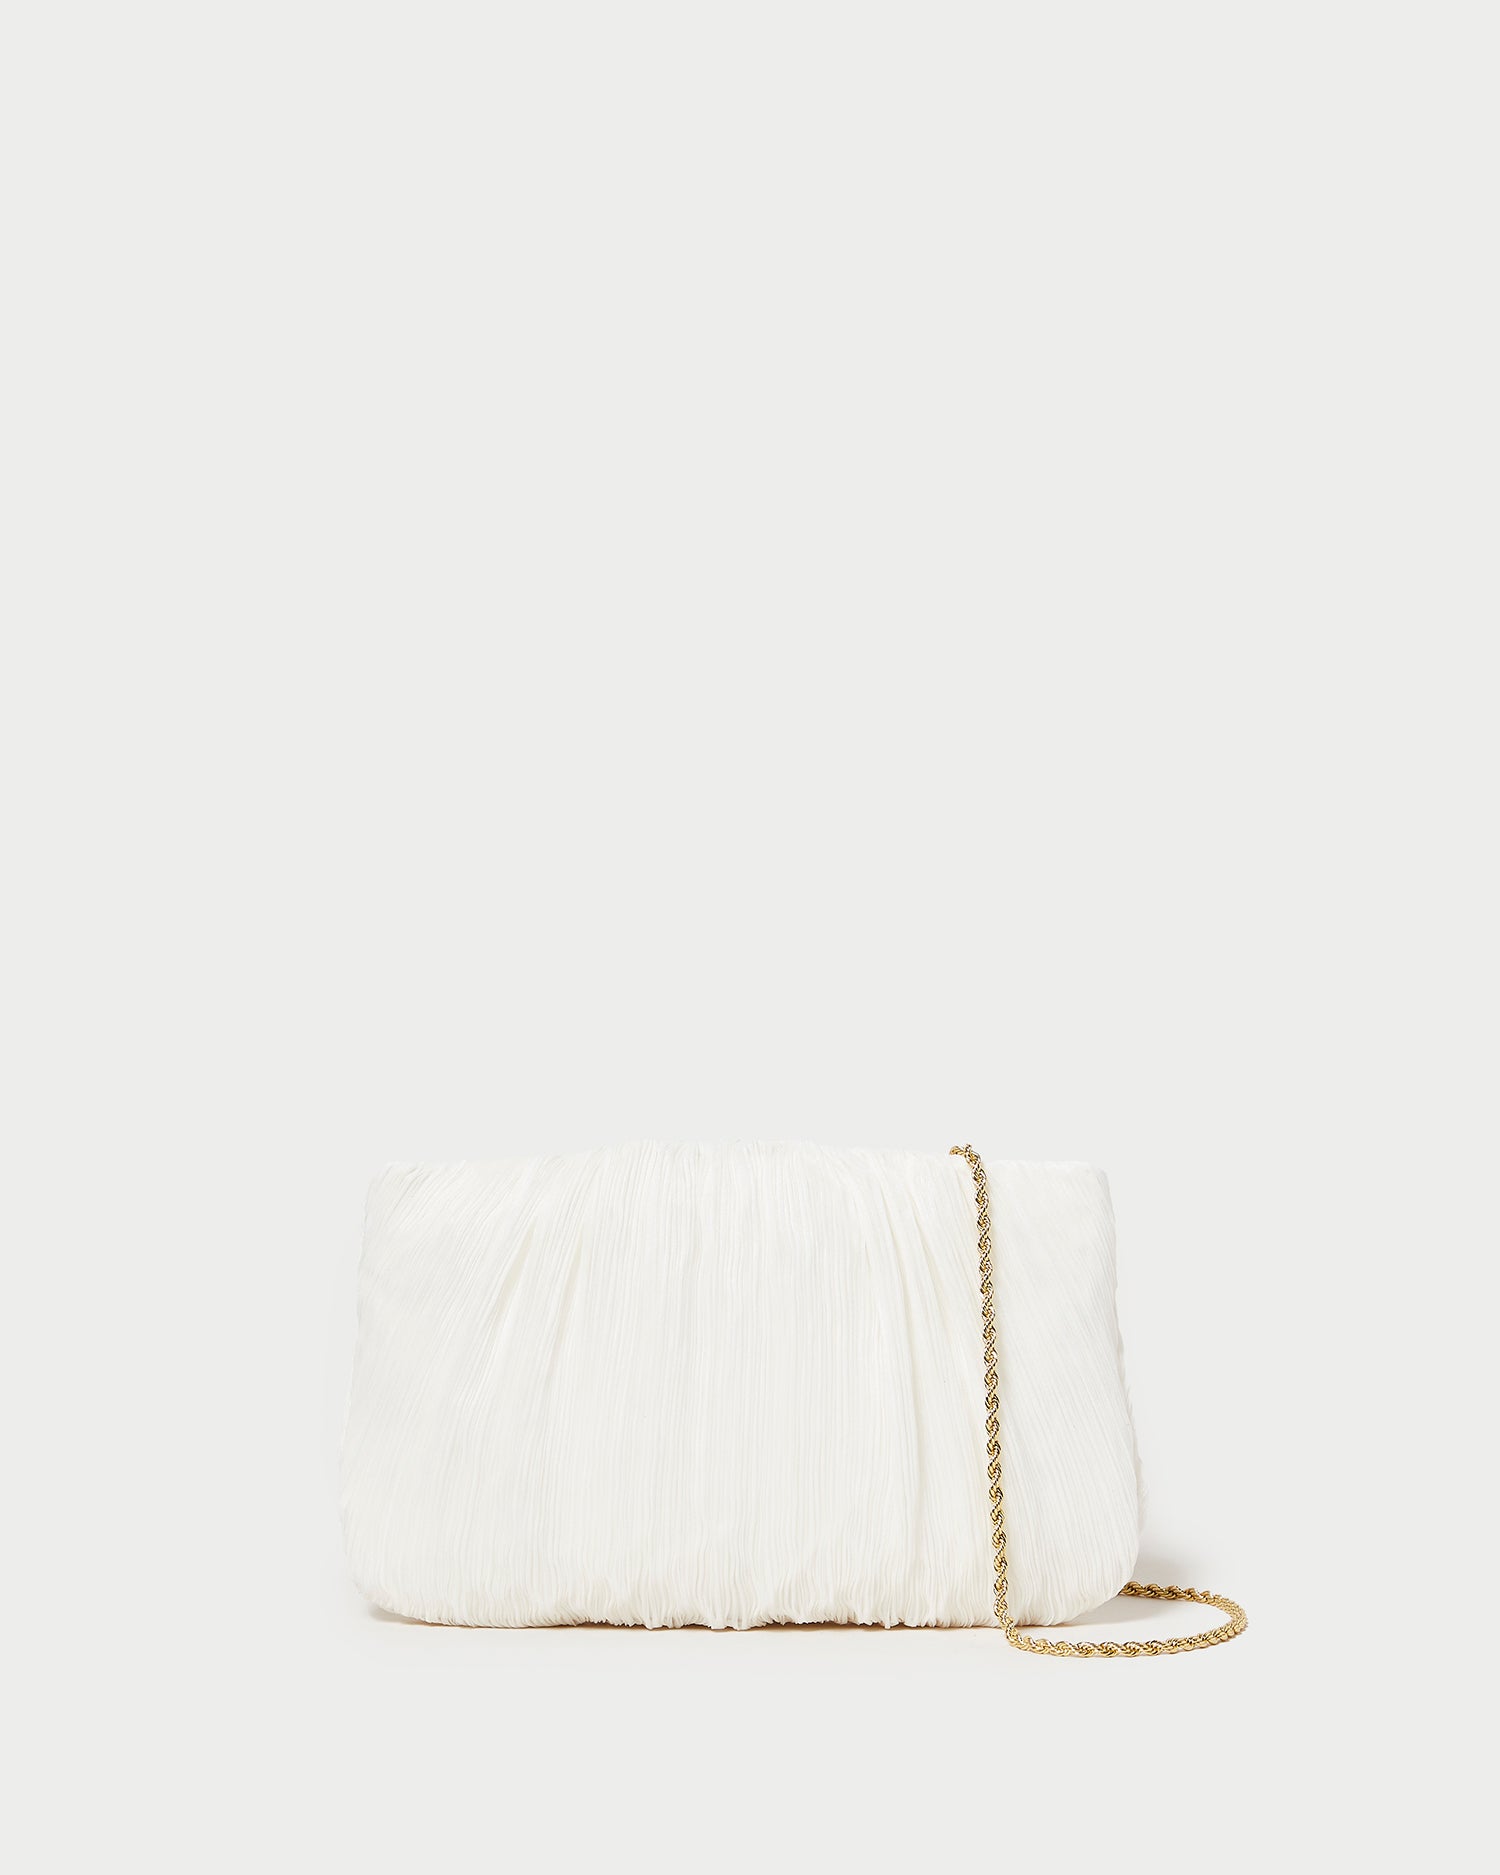 Purse First! Beautiful Clutches for the Stylish Summer Wedding